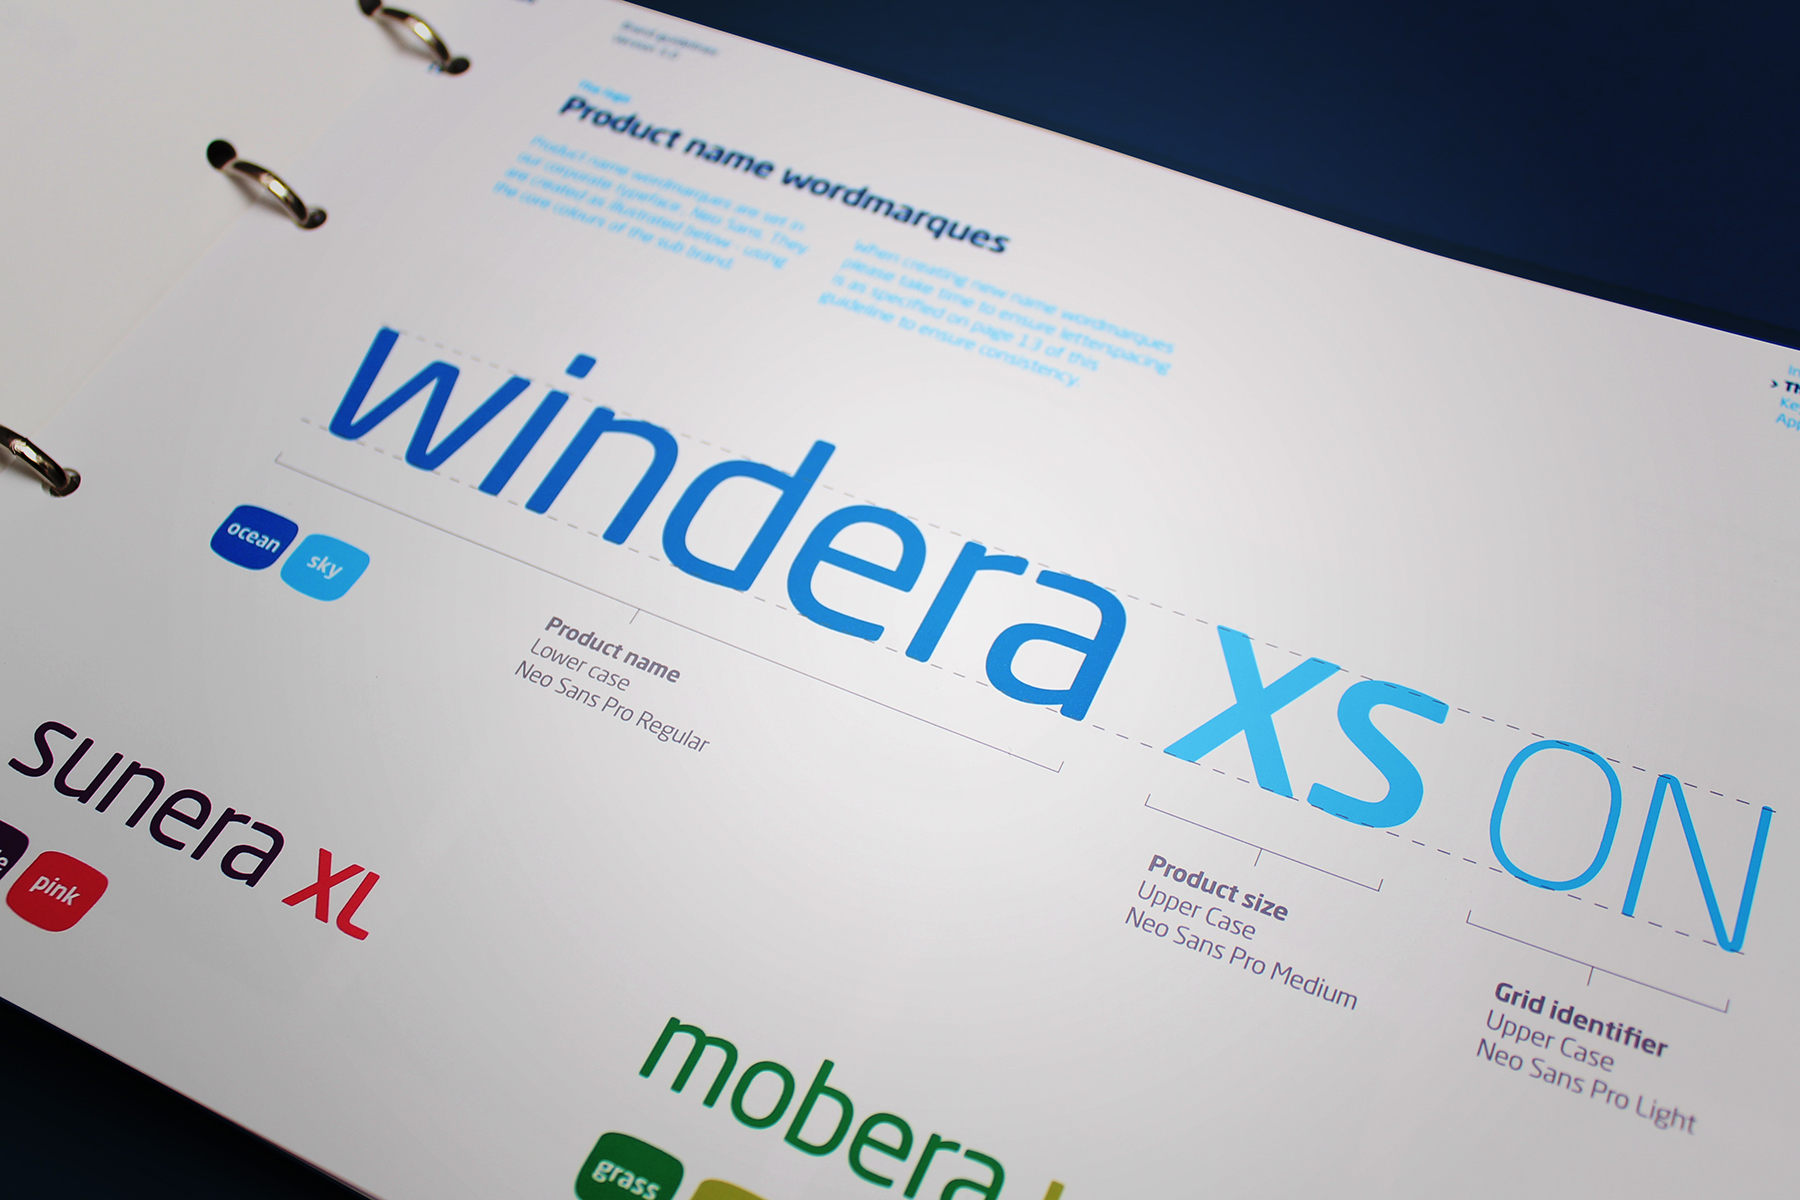 We developed a system for the product naming within the Ennera brand offer.